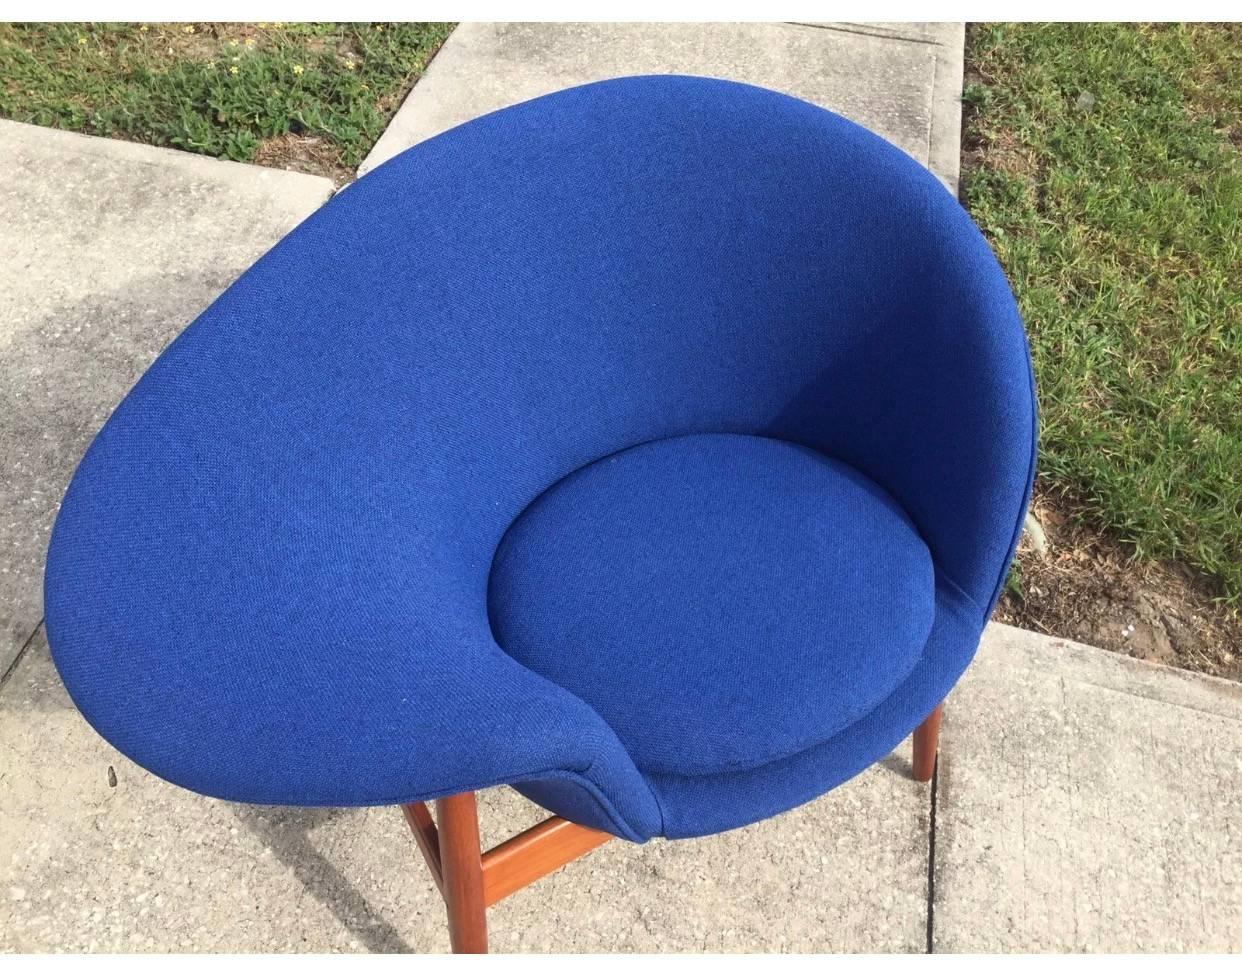 Great condition
New fabric and new foam 
Comes with two seat pillows one white and one blue
Teak base is solid 
Has one small repair as shown in photos 
Retains label.

